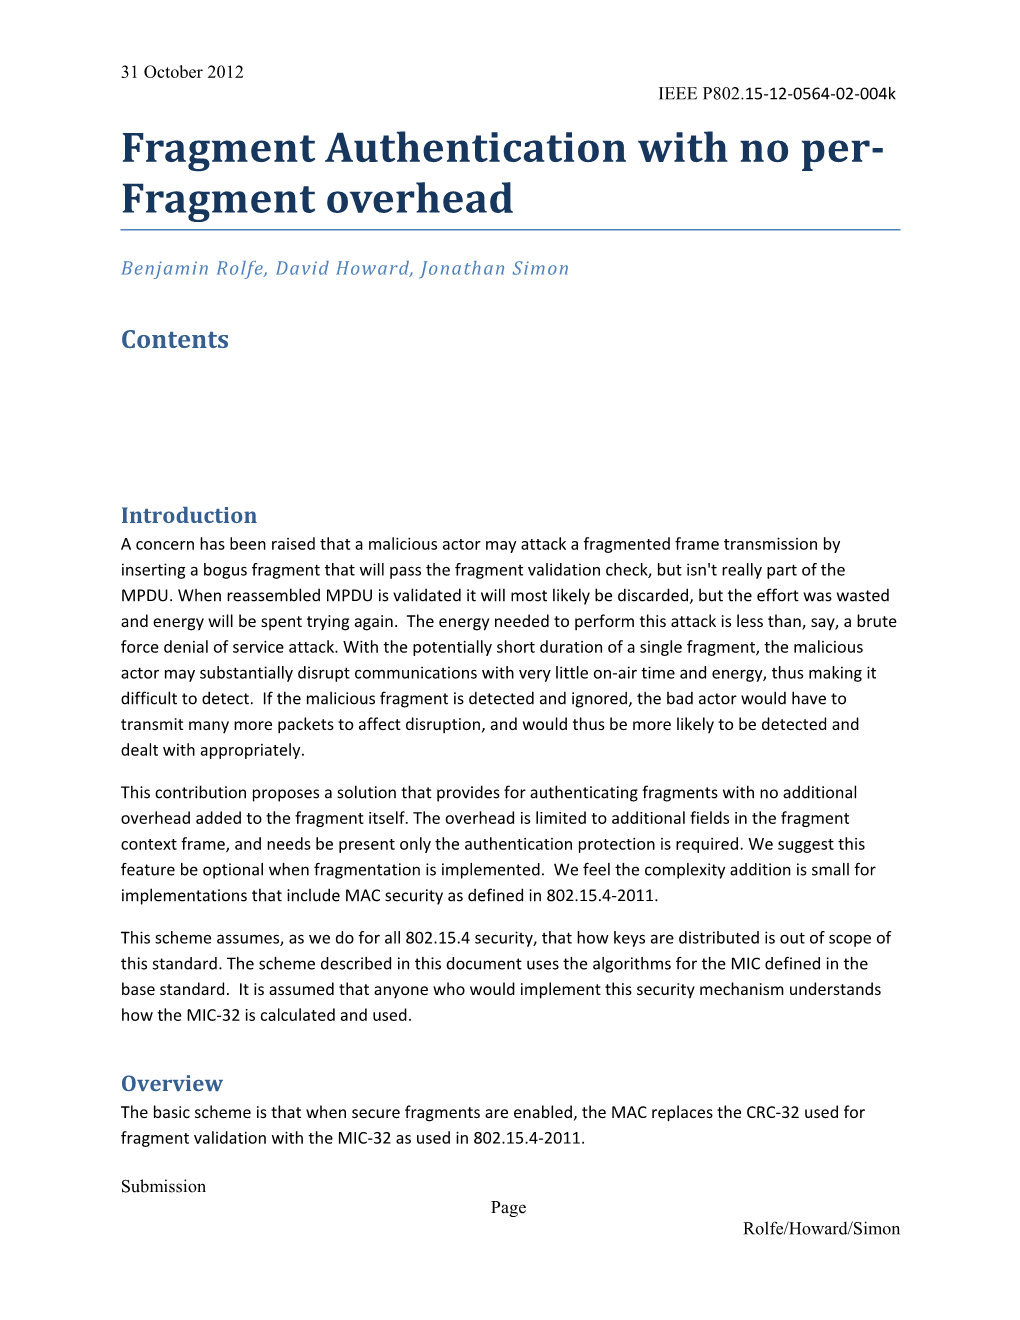 Proposed Fragment Authentication